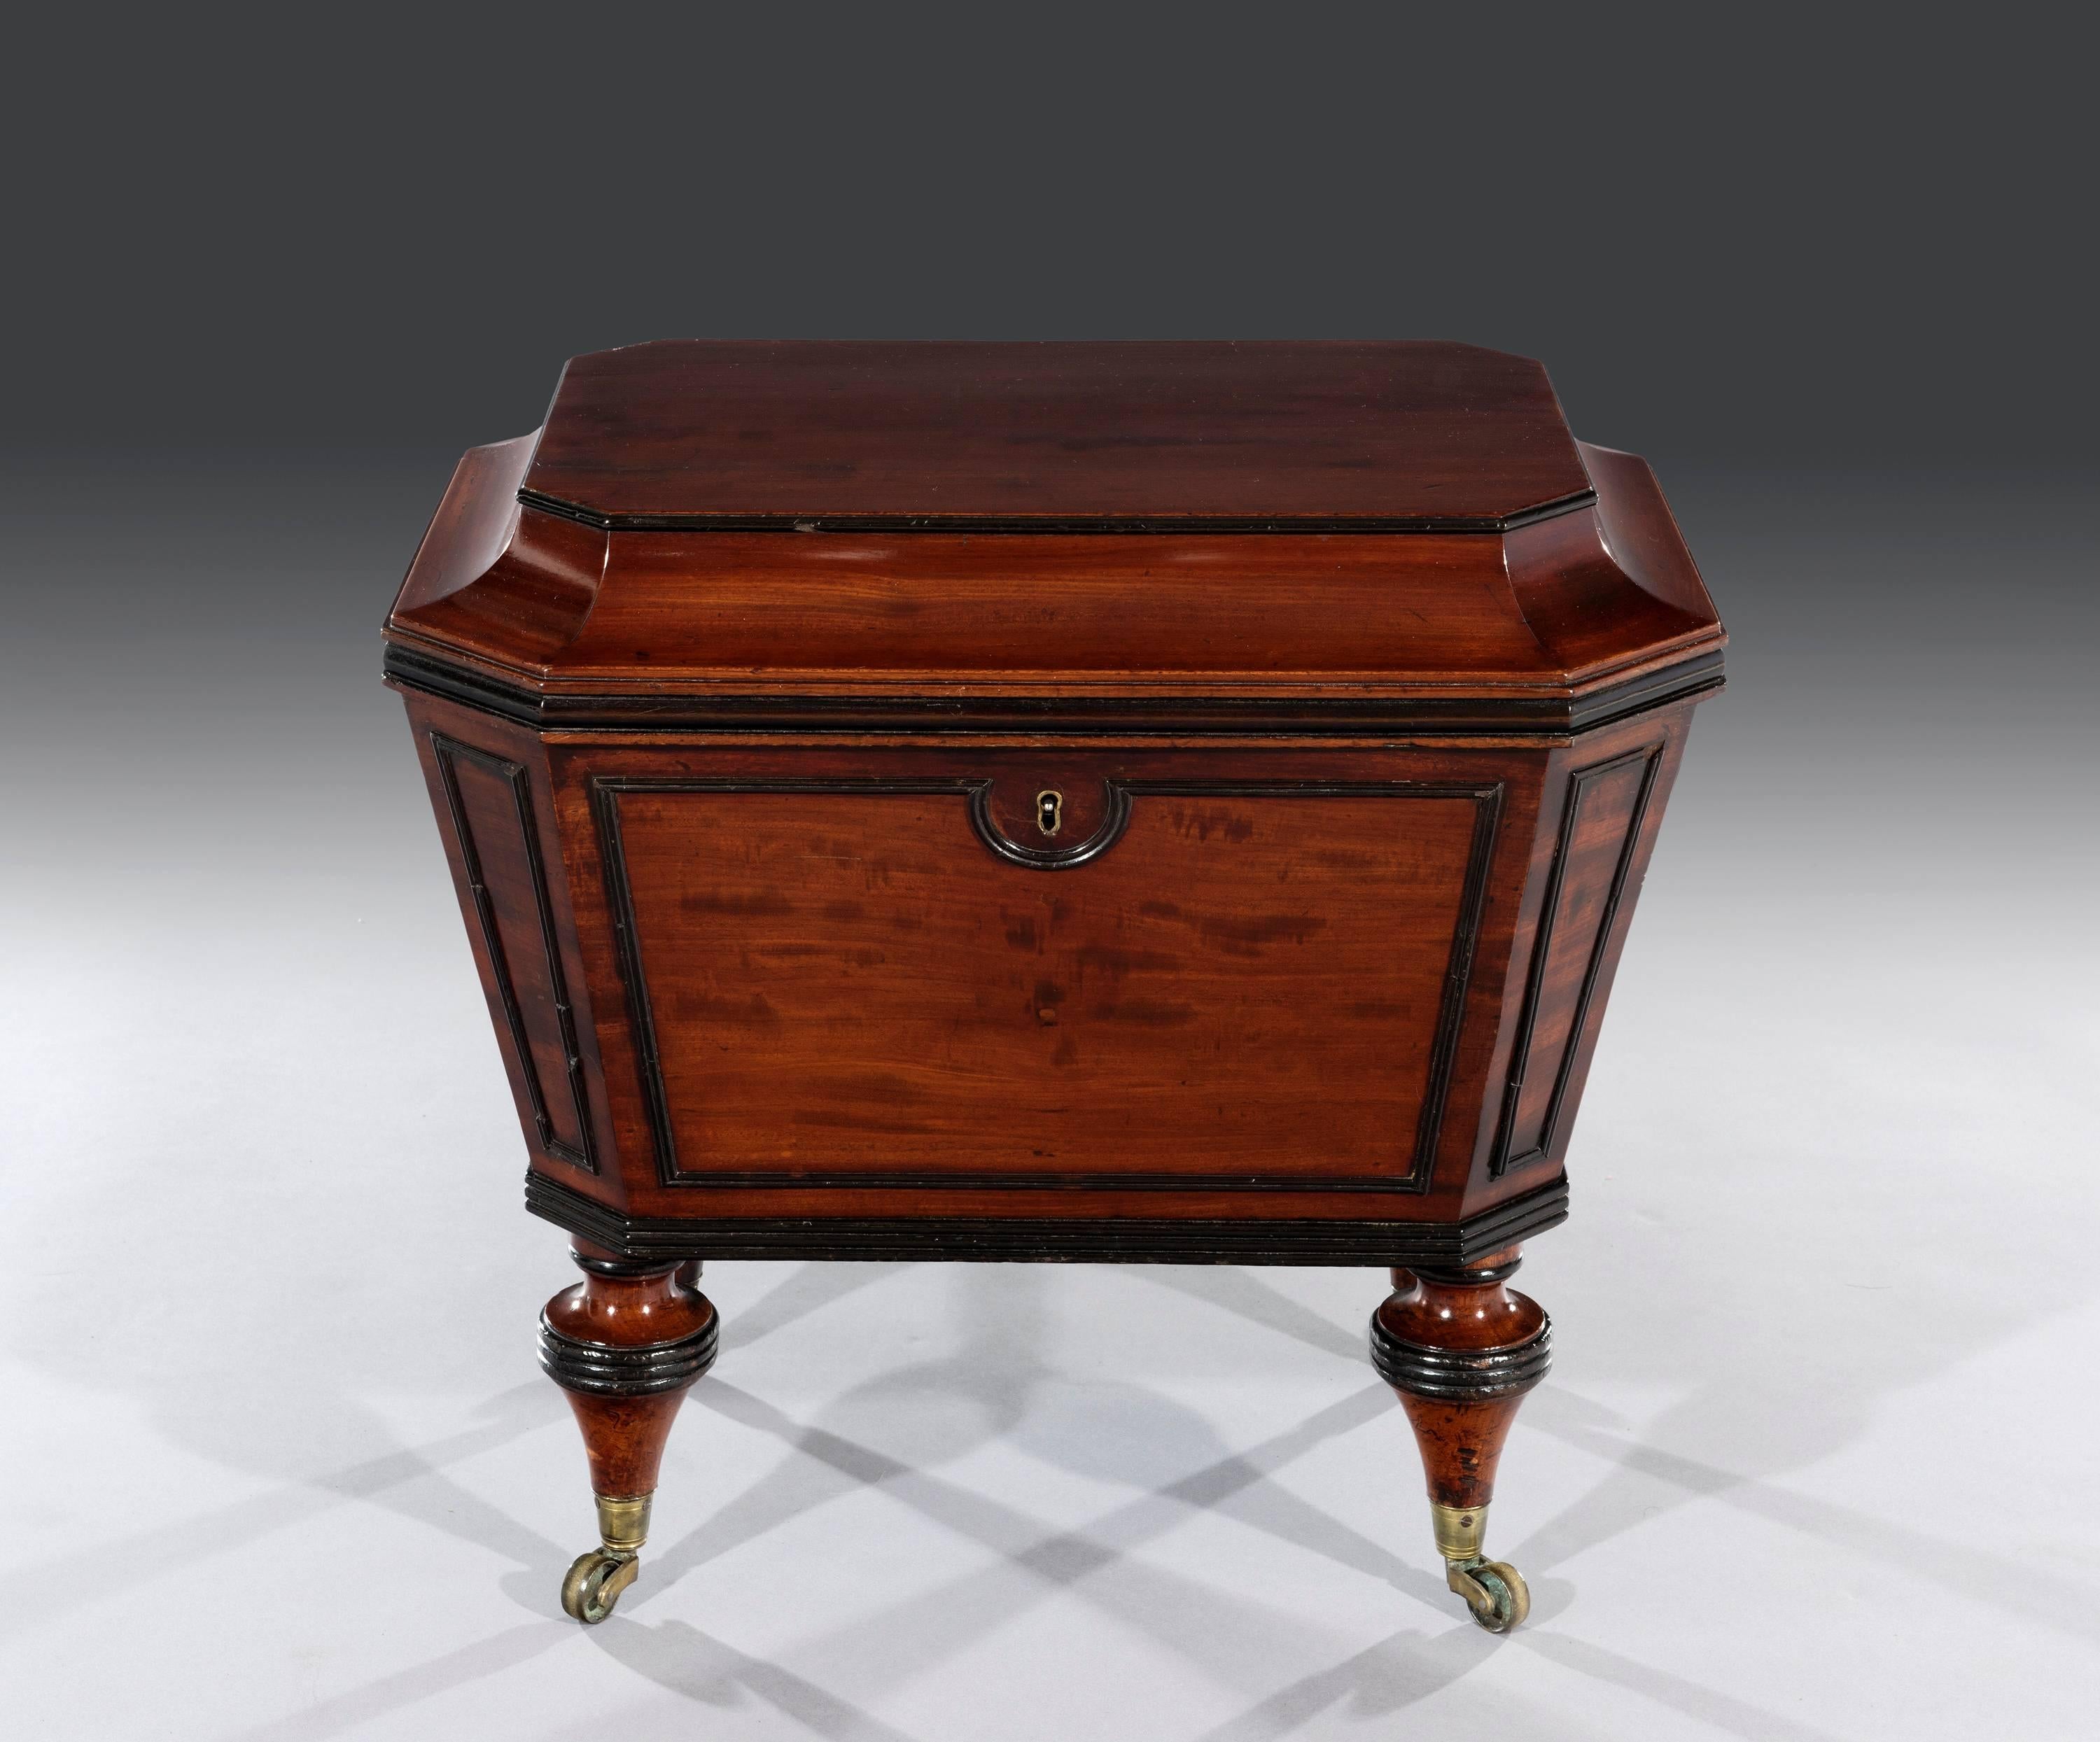 The small flat rectangular mahogany caddy top lid with ebonized mouldings sits above Fine reeded moulded panelled sides with the original fitted lock and lead lined divided interior.

The cellarette is quite unusual standing on its original toupe